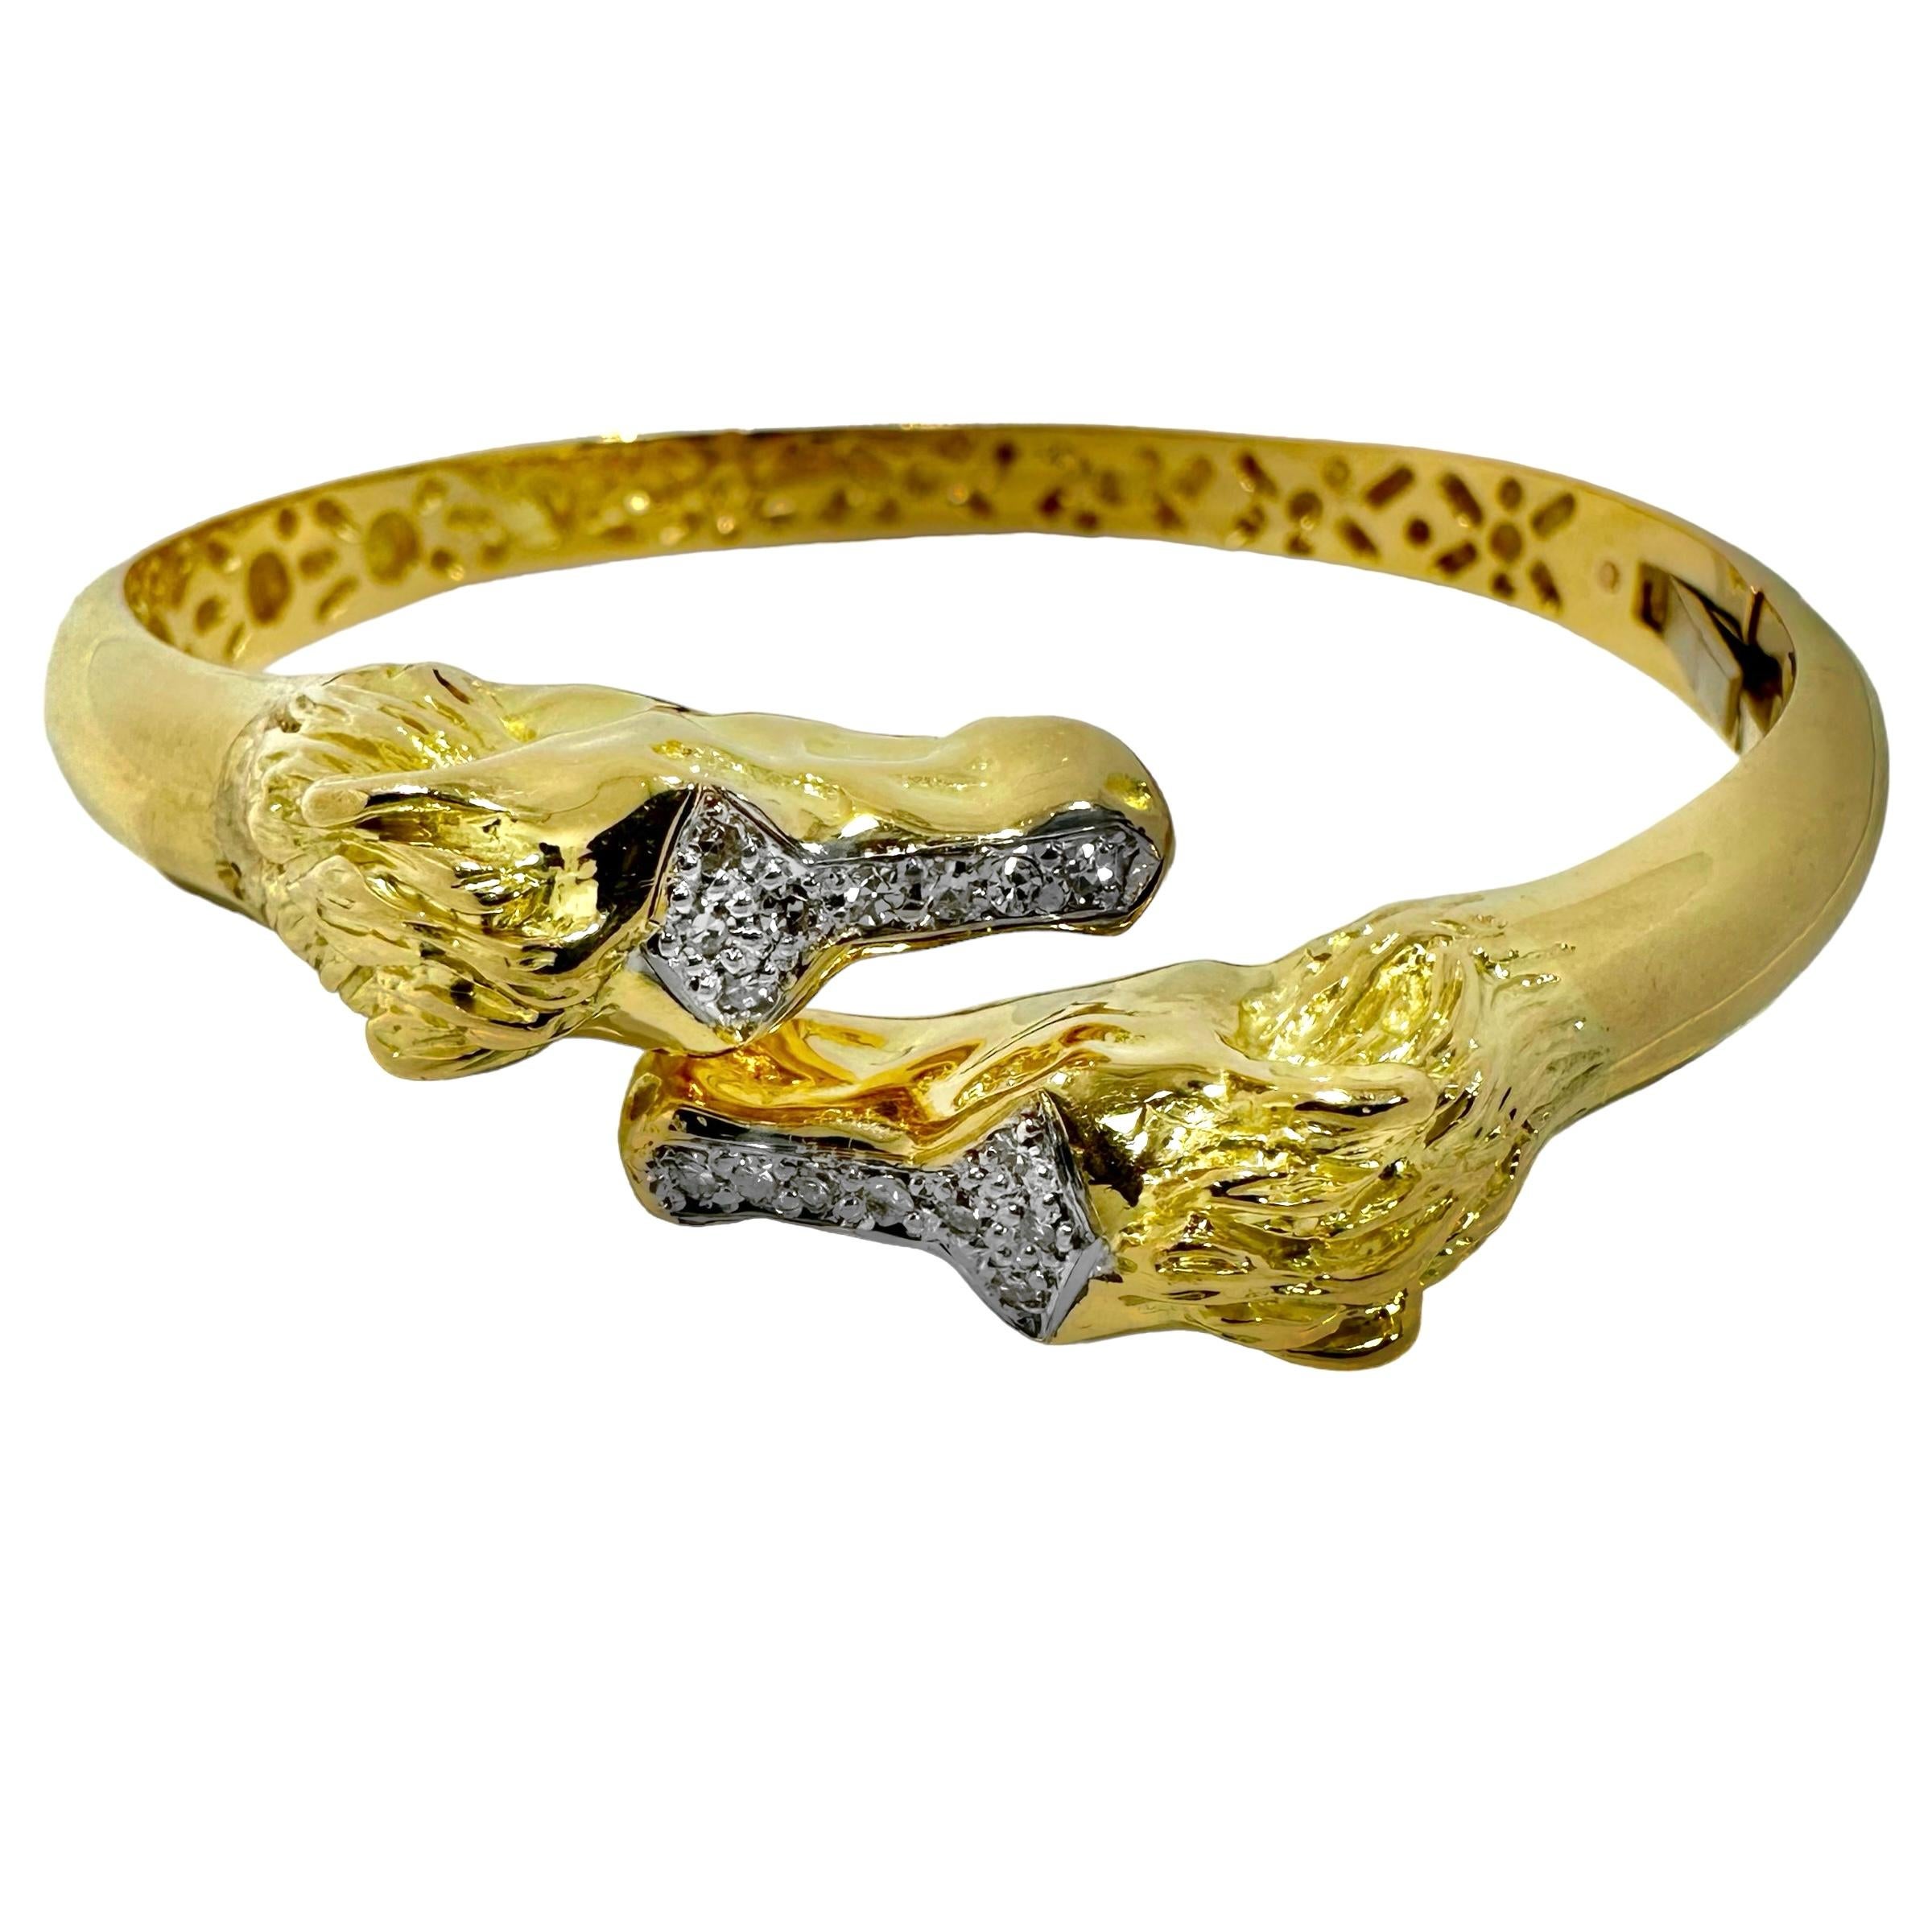 This lovely vintage 18k yellow gold hinged bangle bracelet features two well detailed equestrian heads bypassing each other. This type of bypass bracelet is truly a perennial favorite. Lifelike horse caricatures with flowing manes are set with a